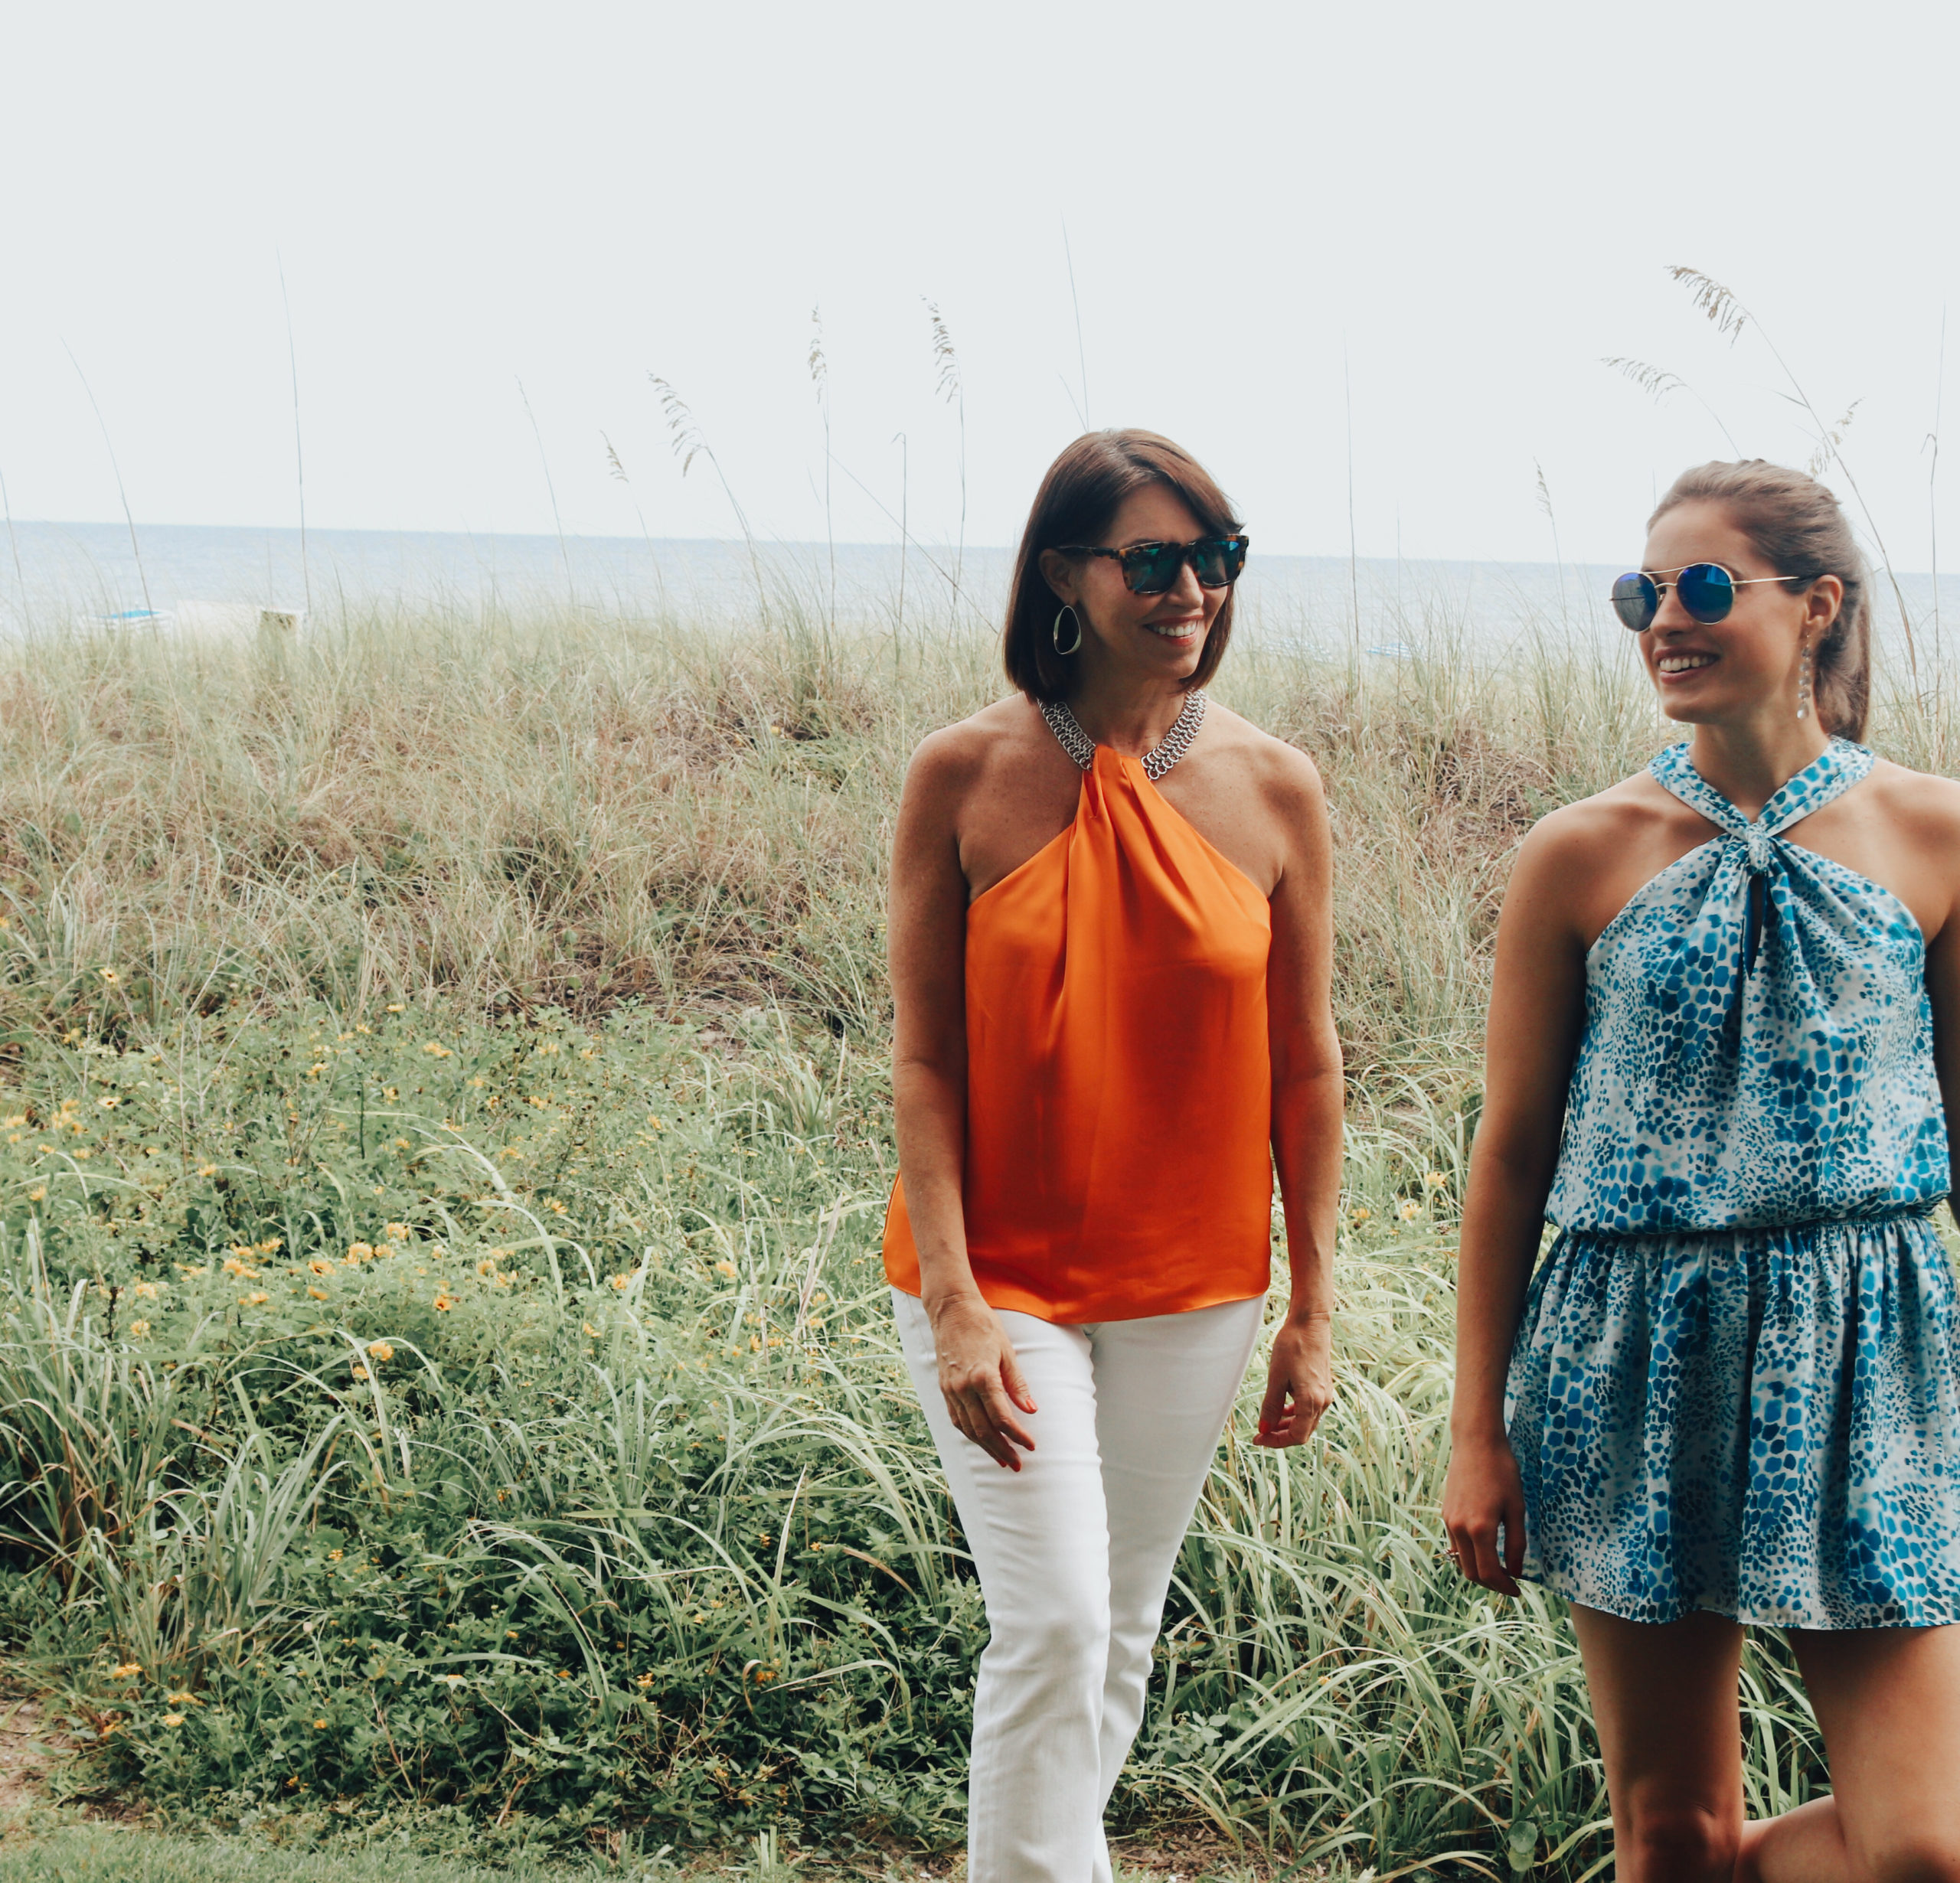 Two women walking in the grass: one wears an orange top with white jeans & the other wears a blue dress. They both have brown hair & are wearing sunglasses